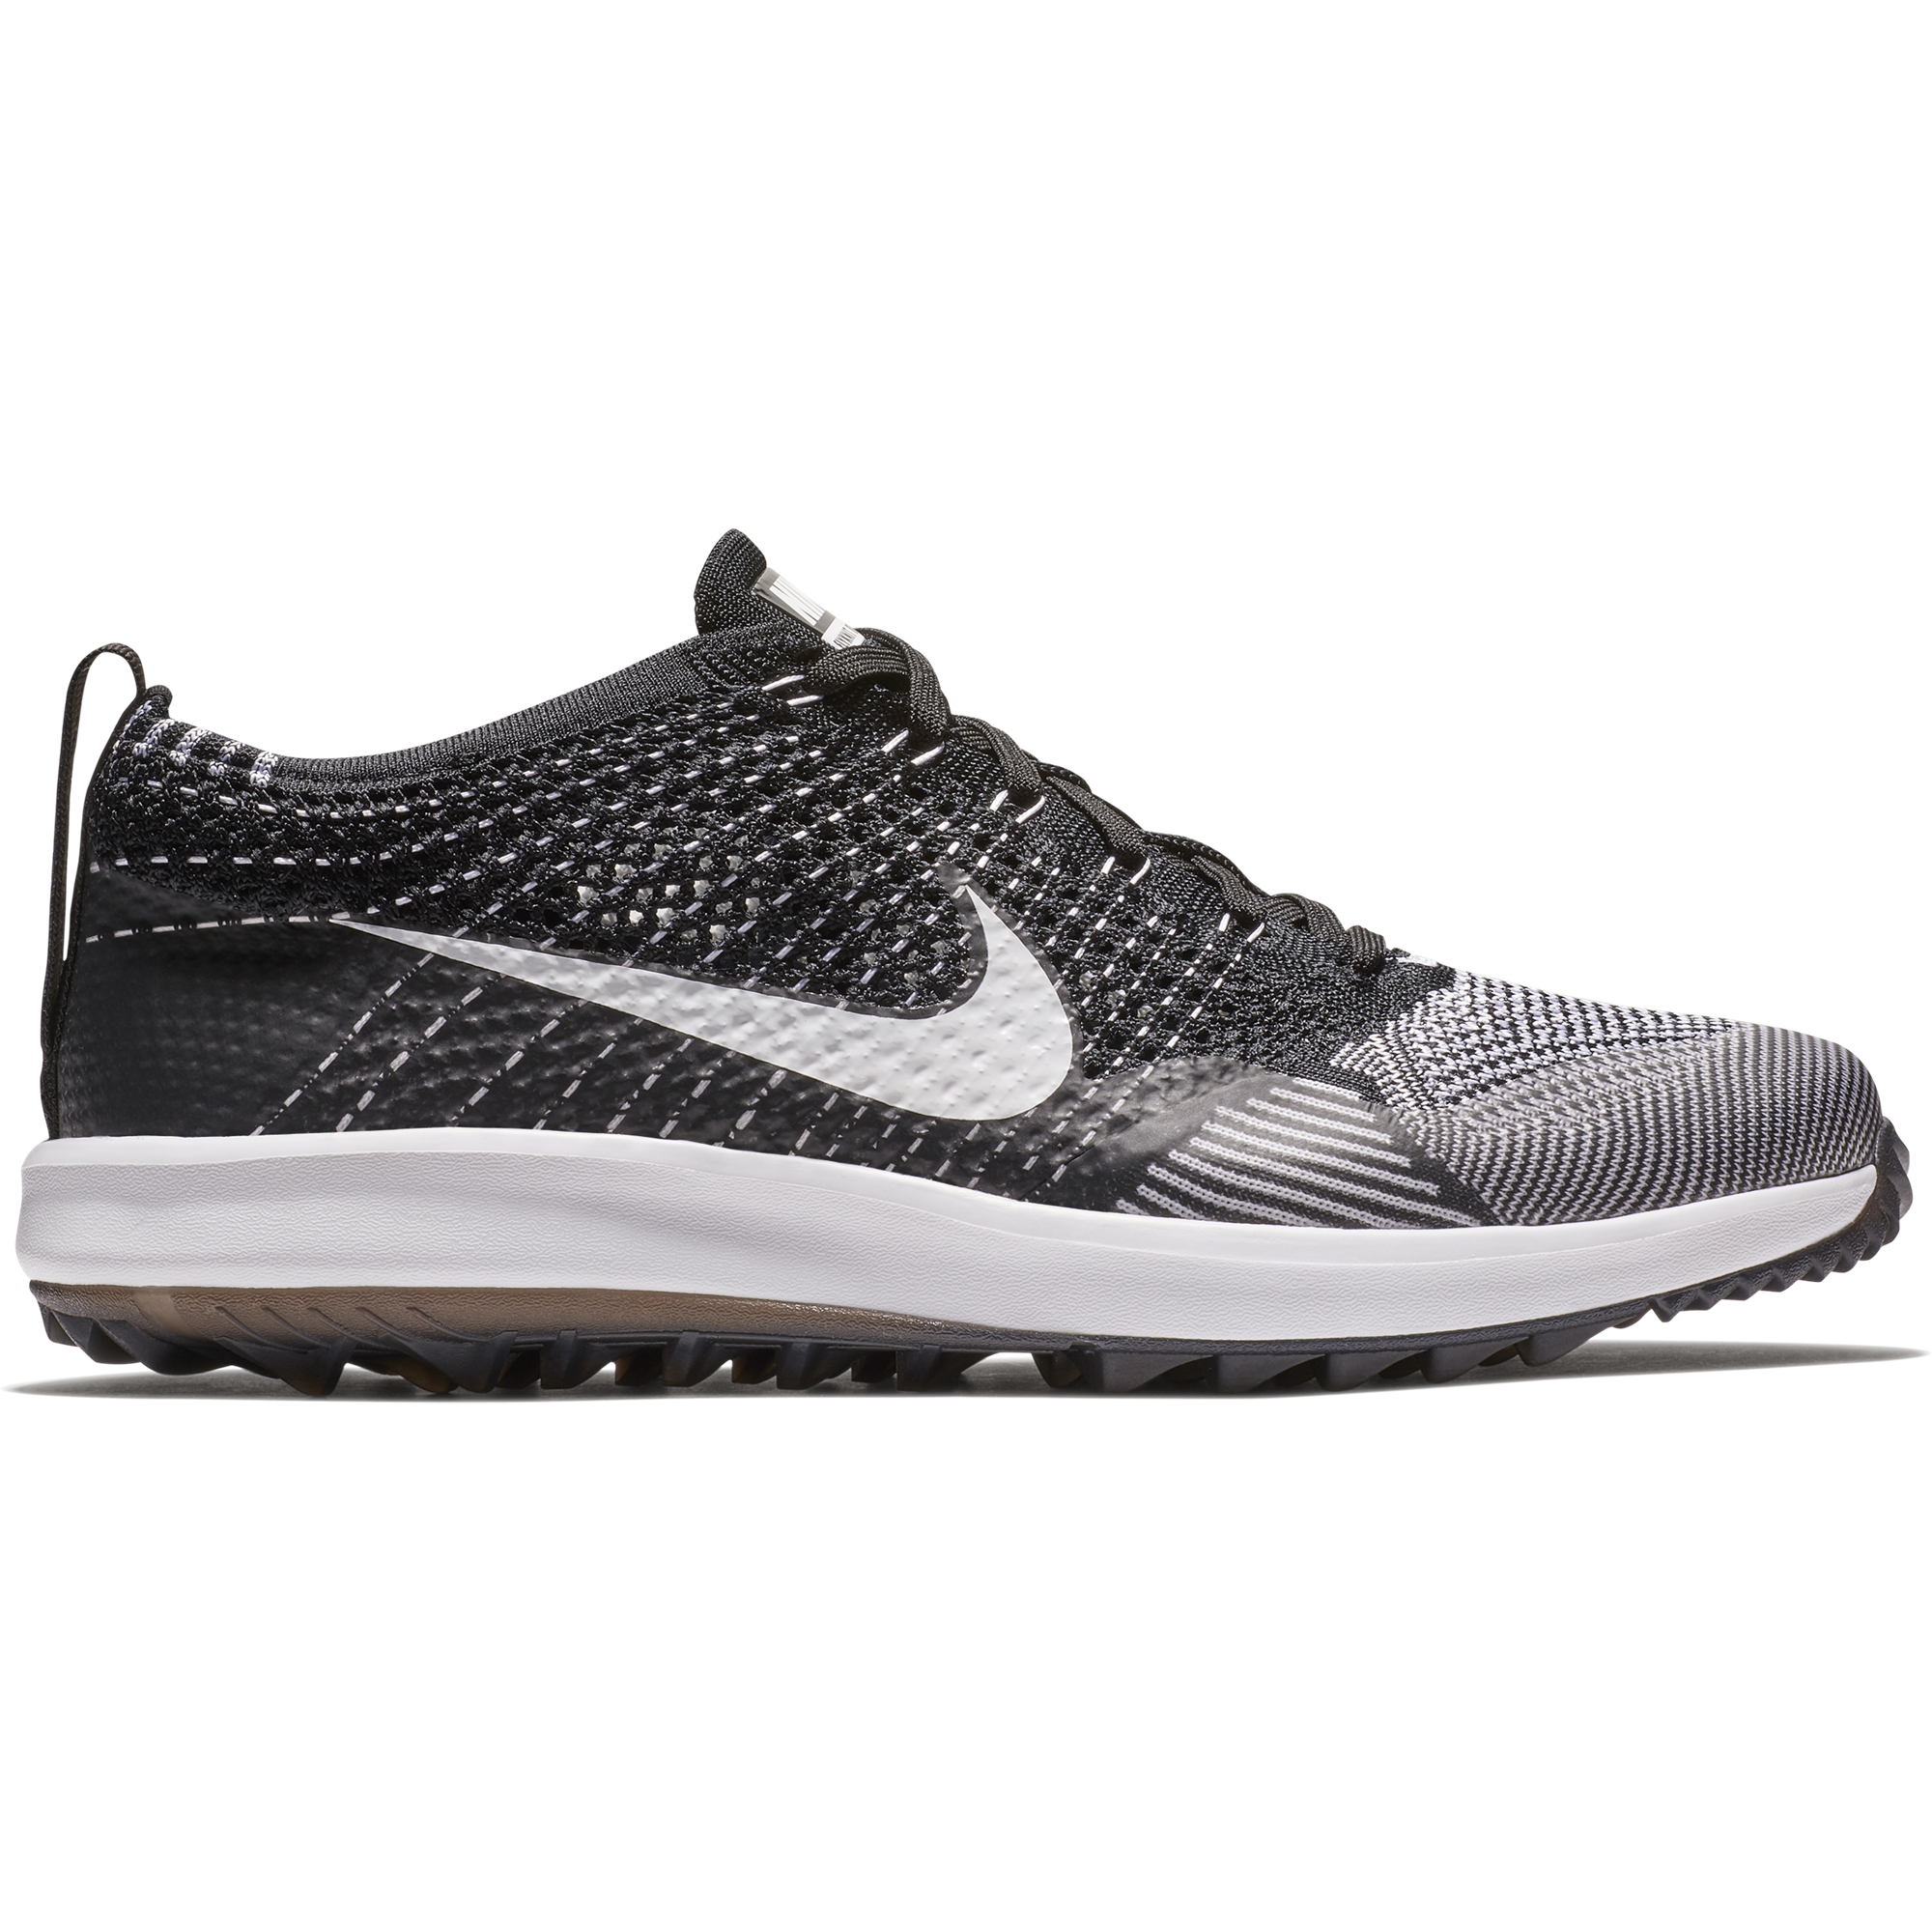 nike knit golf shoes